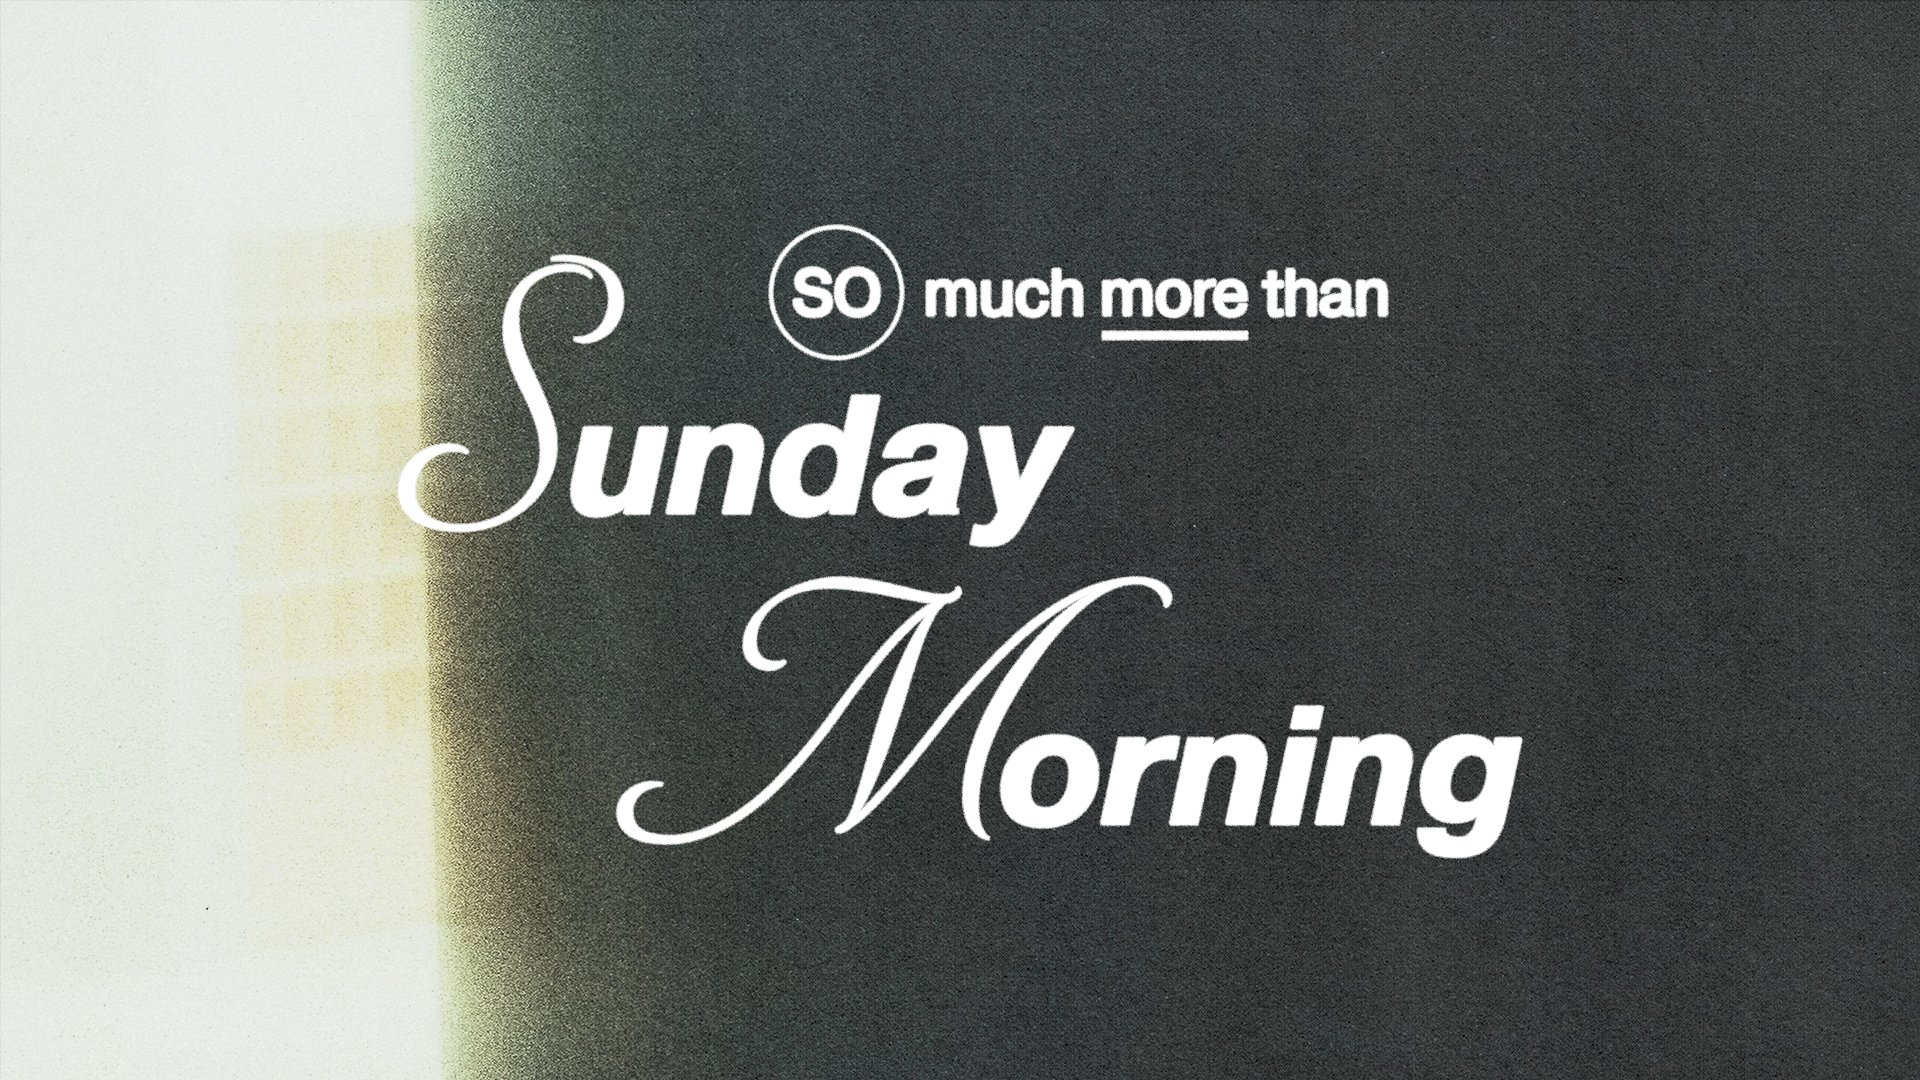 So Much More Than Sunday Morning